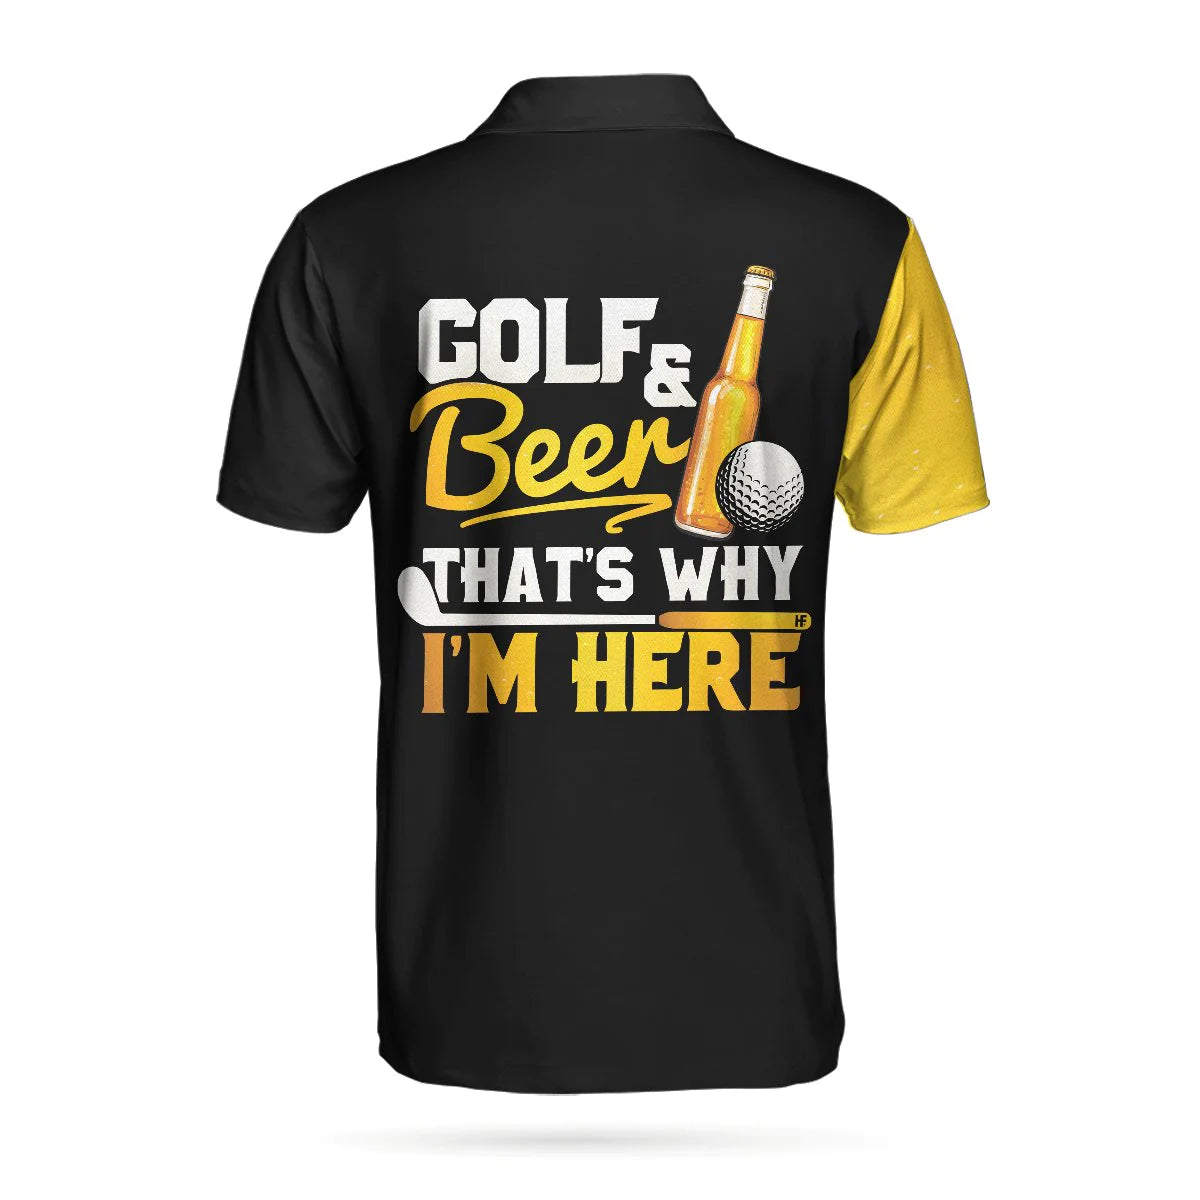 im here for golf and beer short sleeve polo shirt gp436 oa6nk